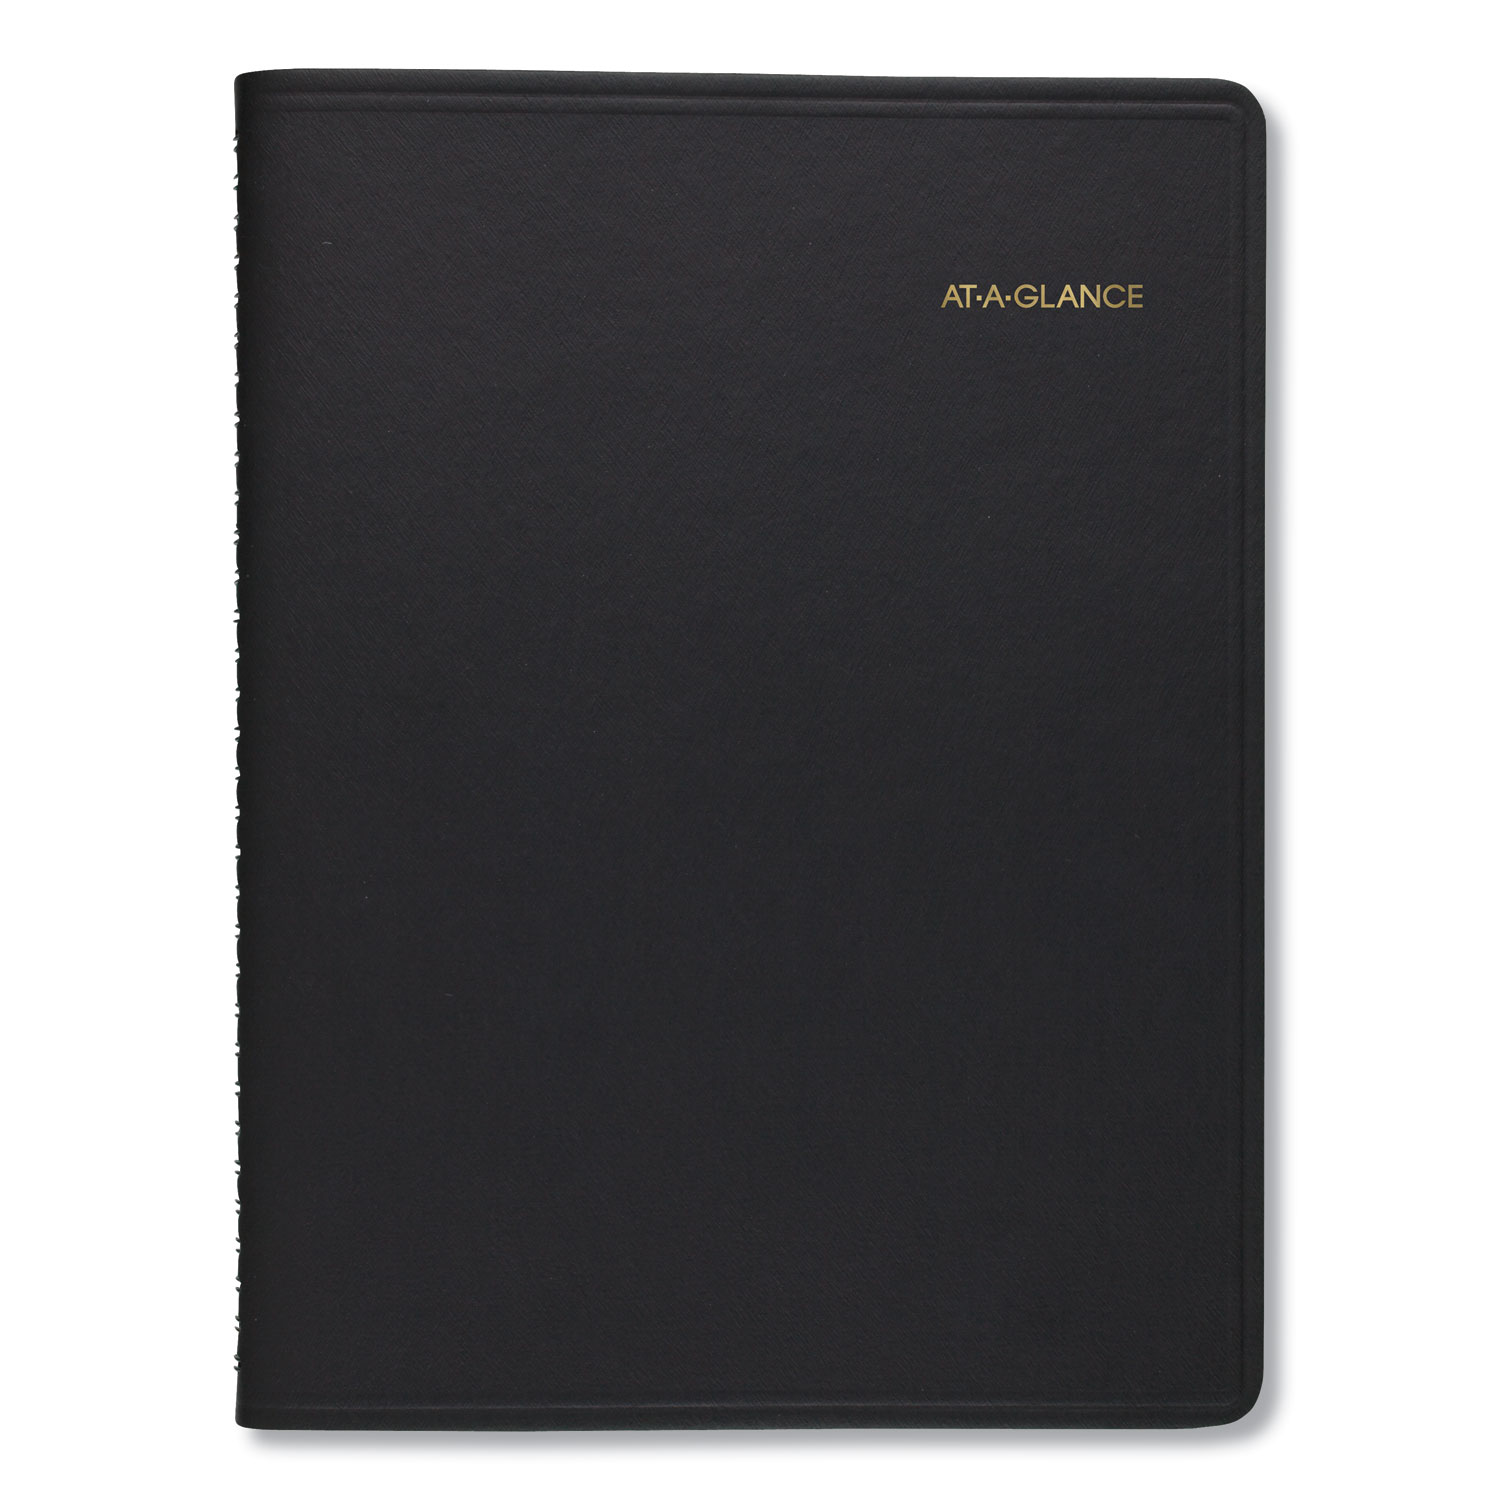  AT-A-GLANCE 7022205 Two-Person Group Daily Appointment Book, 10 7/8 x 8, Black, 2020 (AAG7022205) 